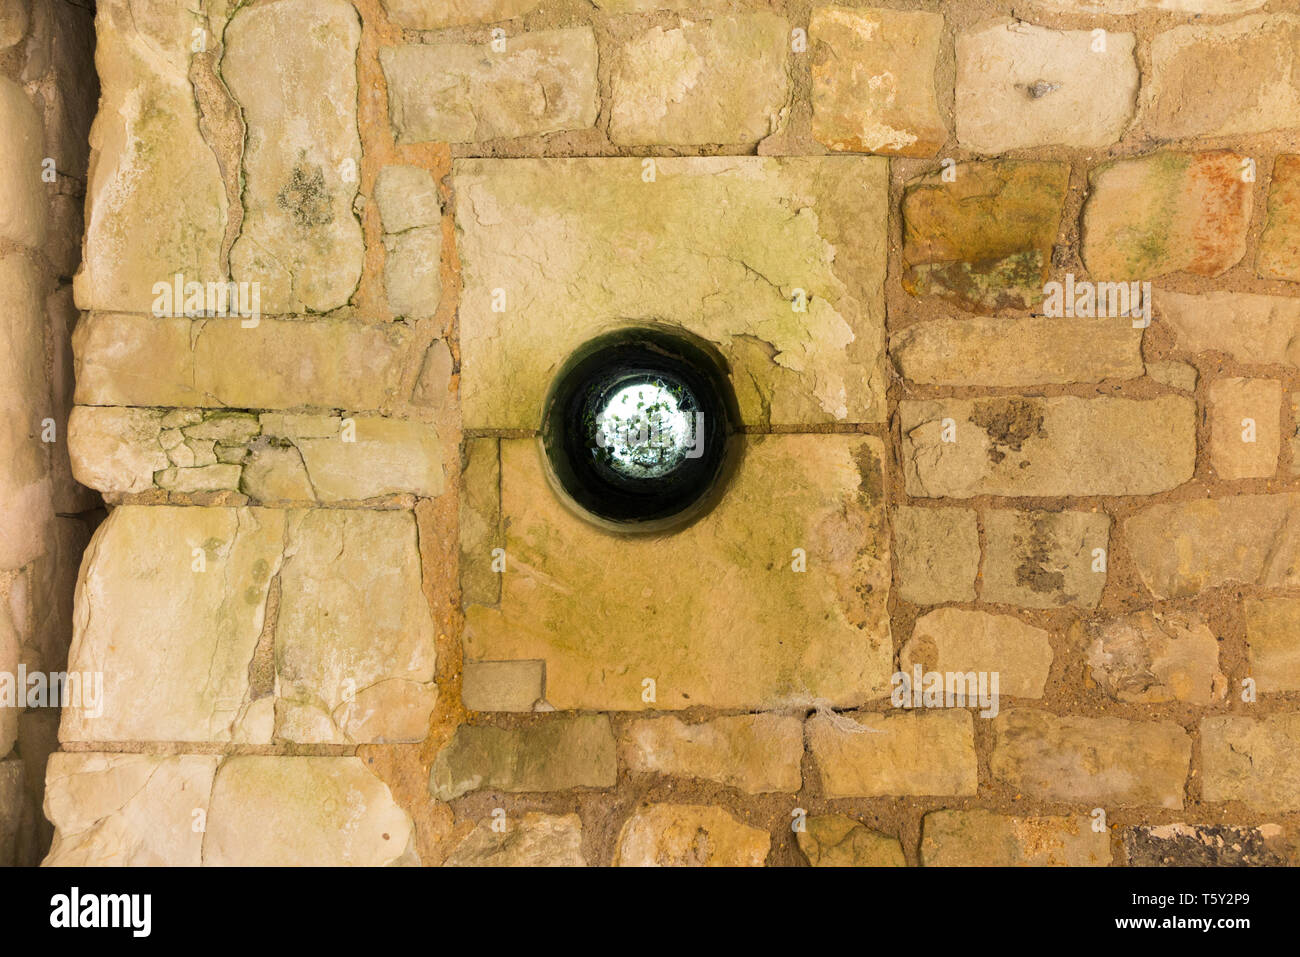 The murder hole (through which defenders would drop deadly objects) at  the entrance of Farnham castle in Surrey, UK. The murder hole is seen from below, looking up. (108) Stock Photo